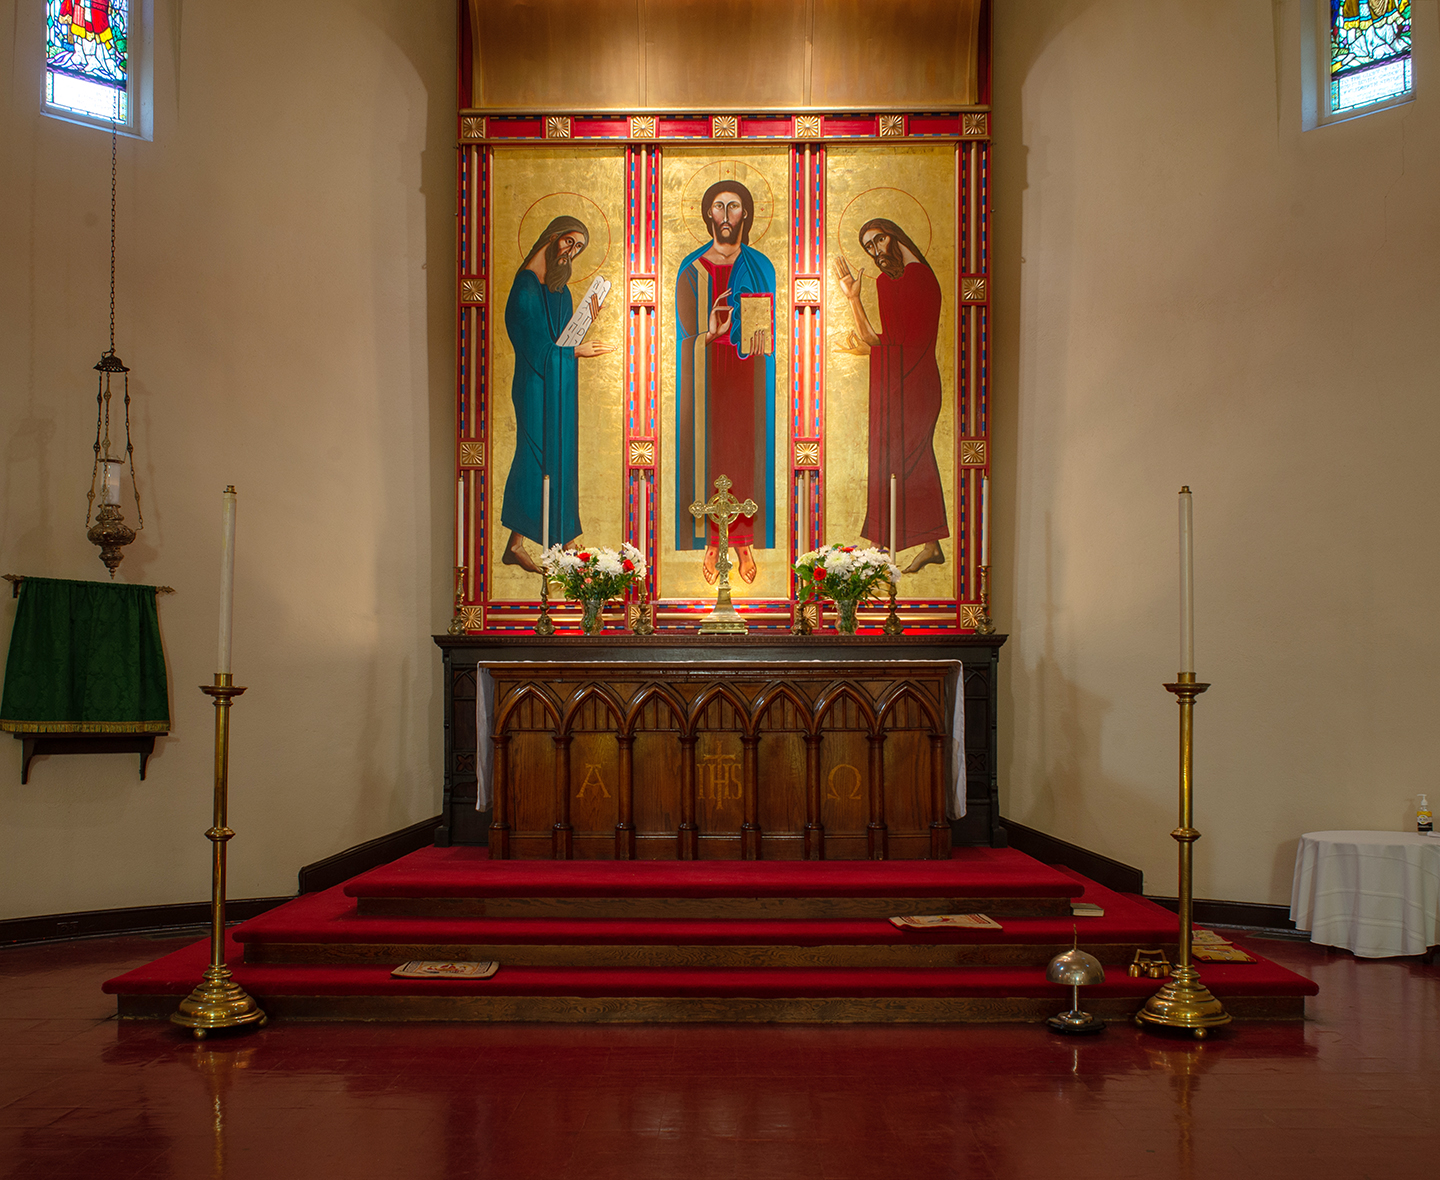 Altar during summer Ordinary Time, showing bare wood without a cloth frontal.